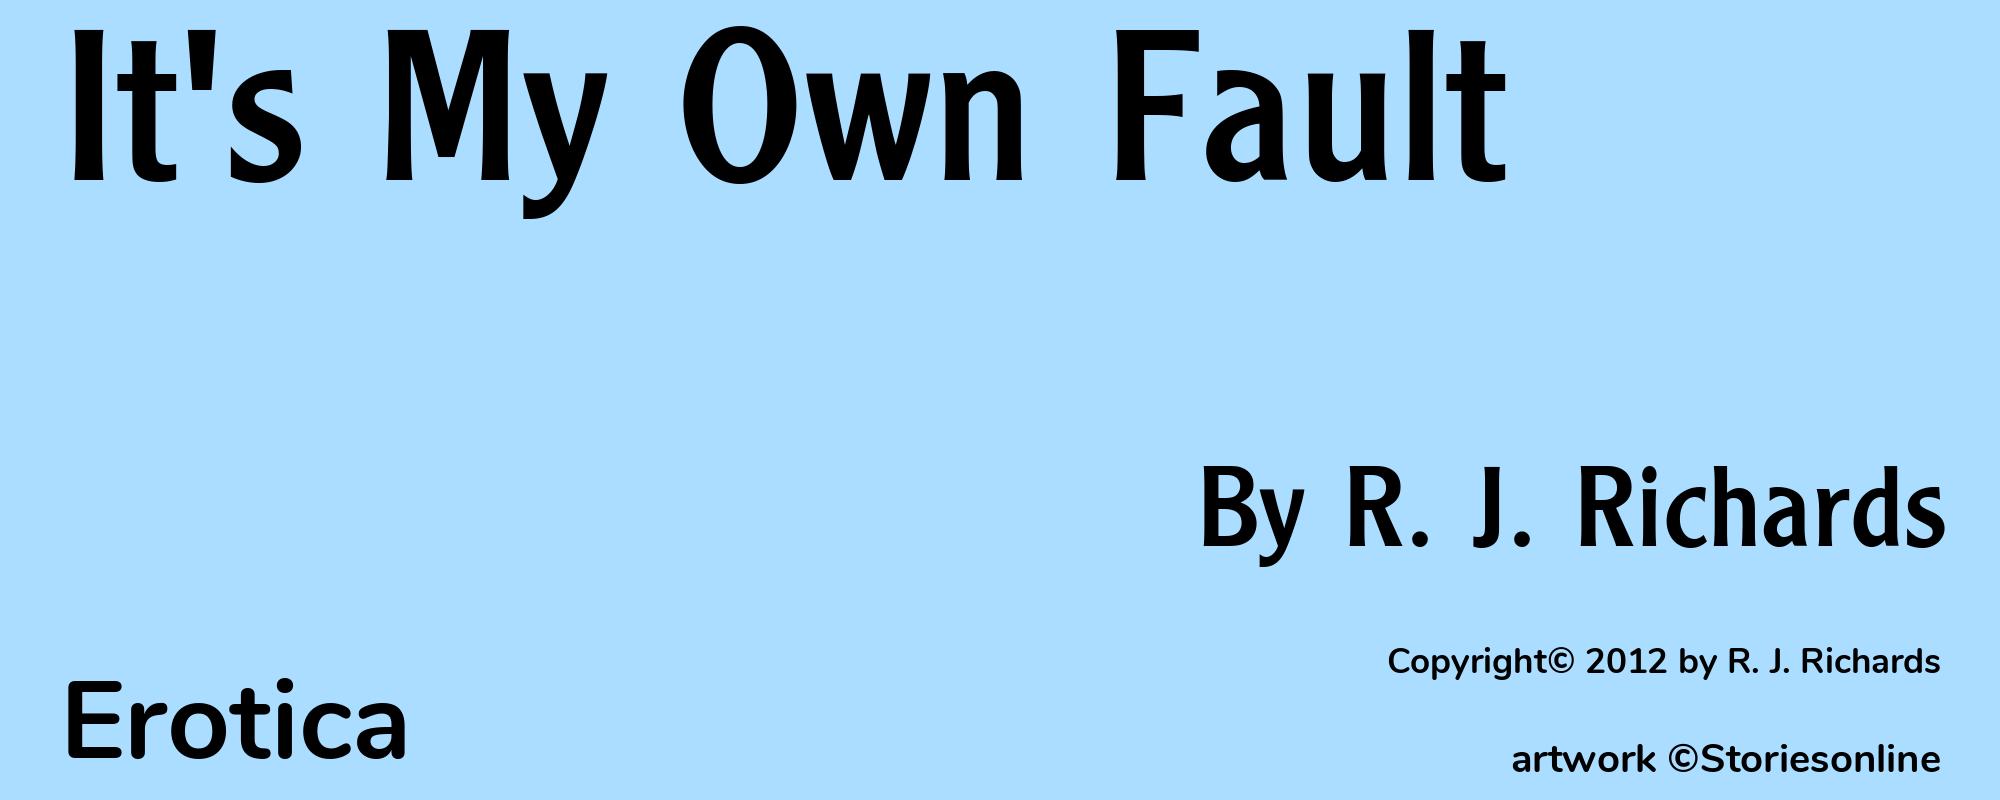 It's My Own Fault - Cover